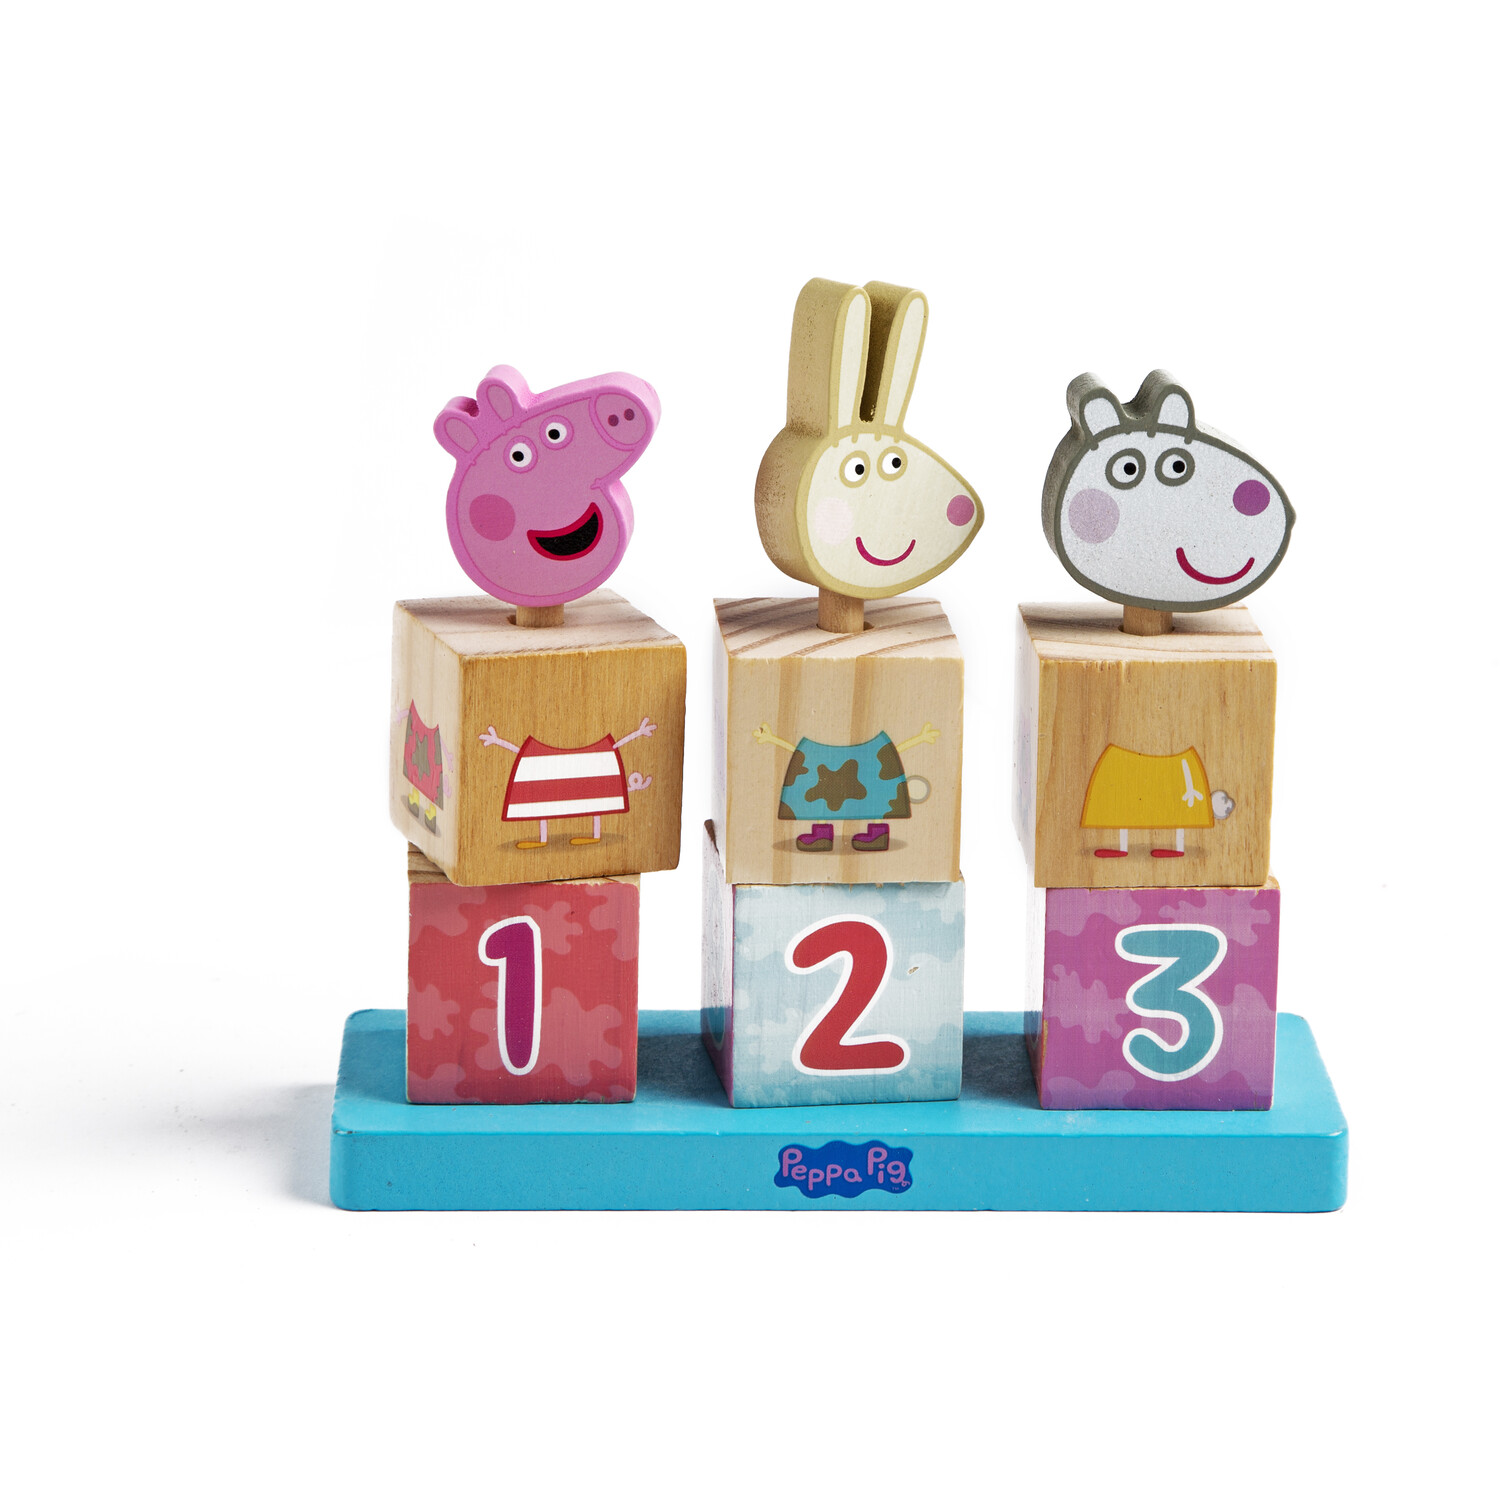 Peppa Pig Blue Wooden Stacking Puzzle Toy Image 2